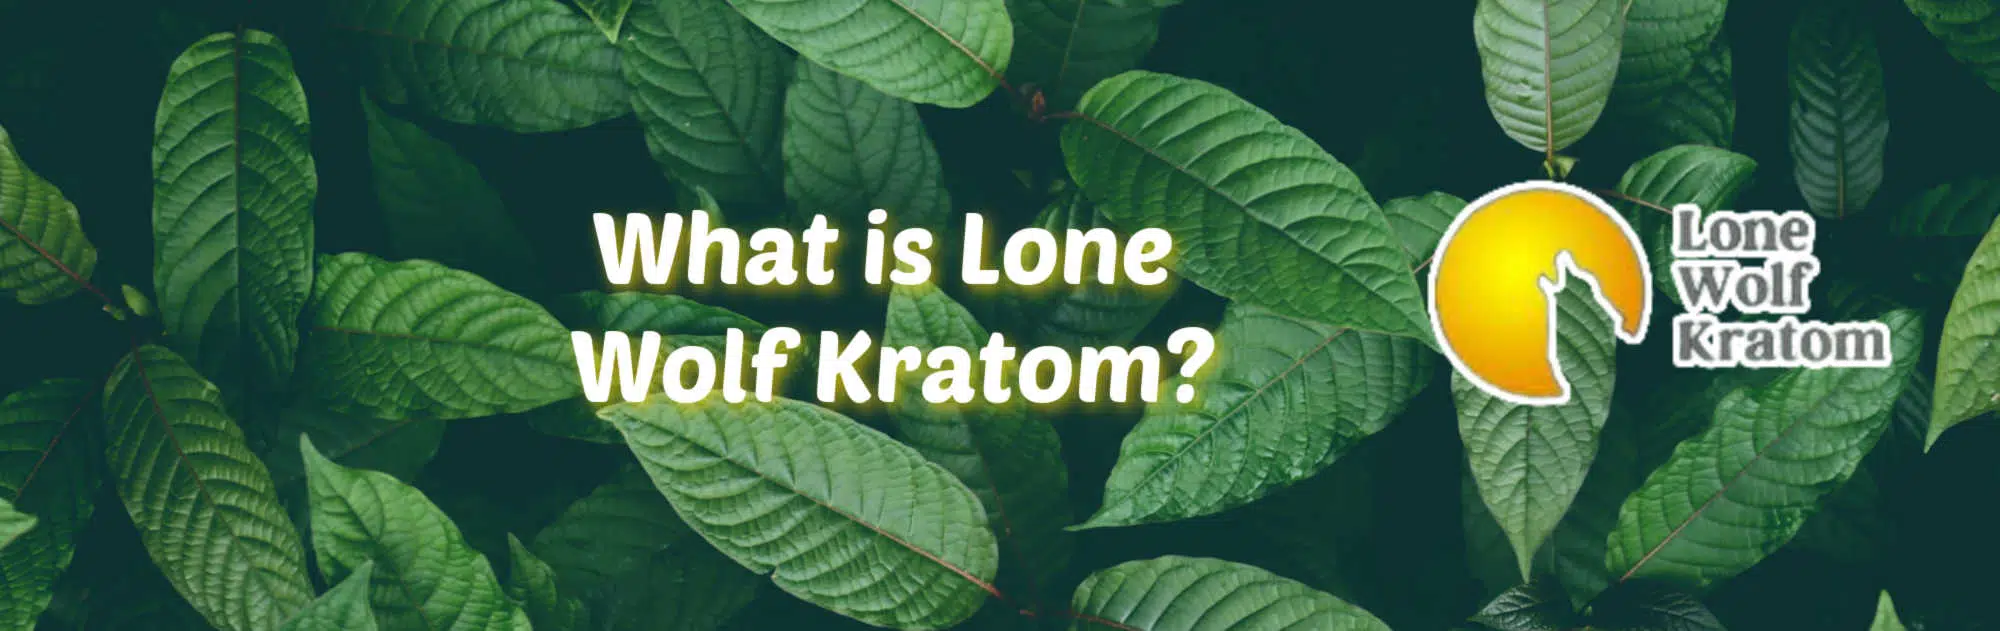 "What is lone wolf kratom?" banner